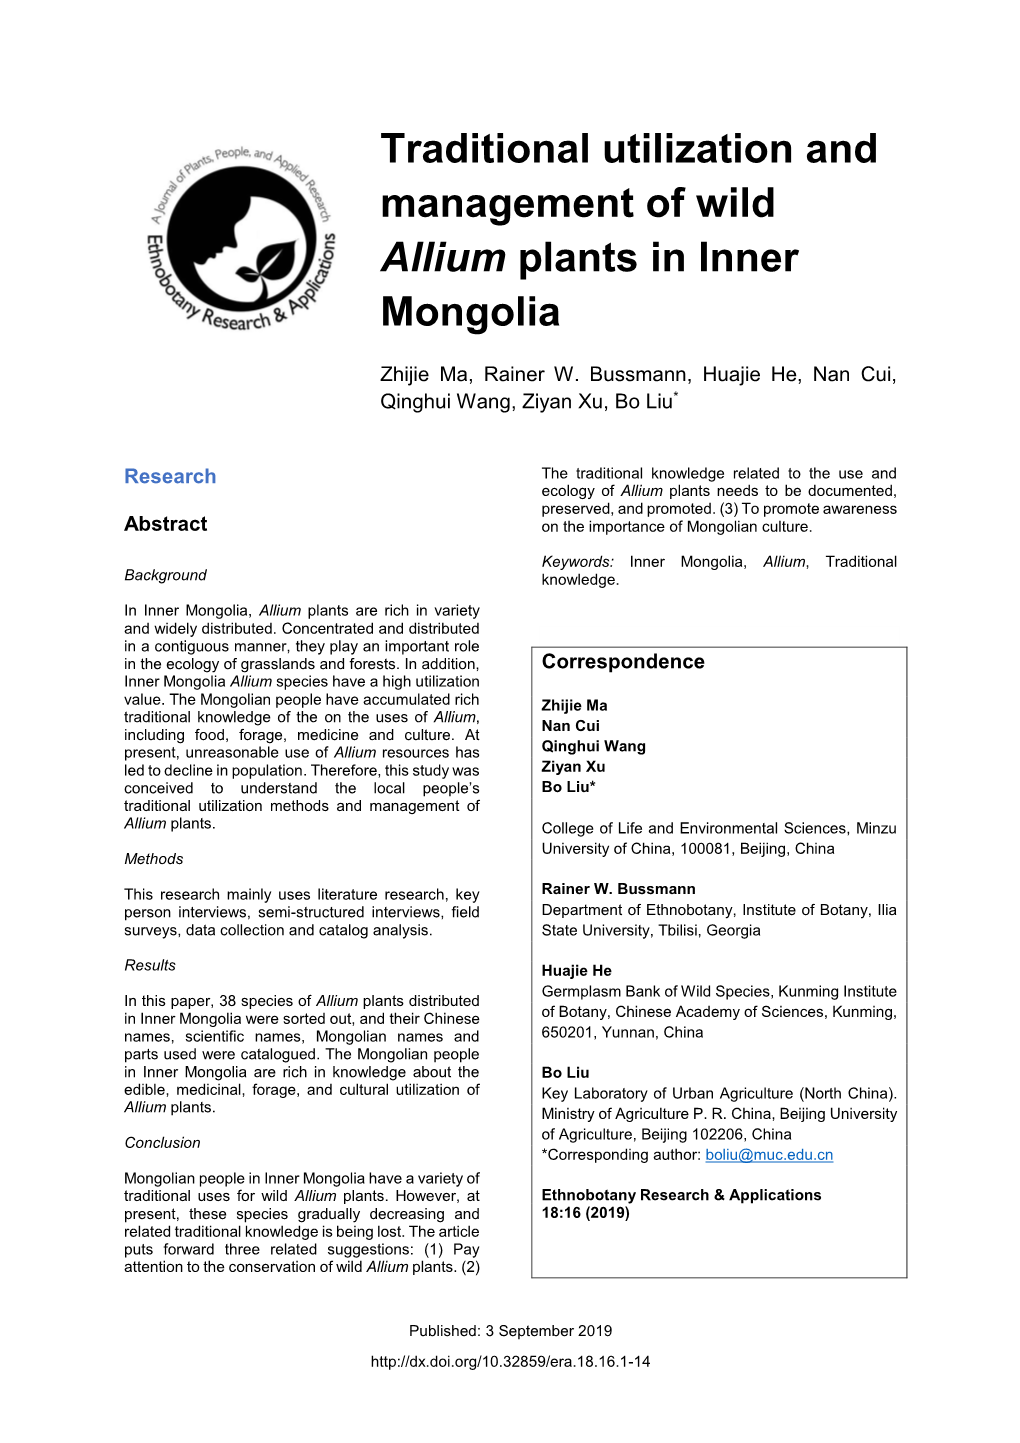 Traditional Utilization and Management of Wild Allium Plants in Inner Mongolia